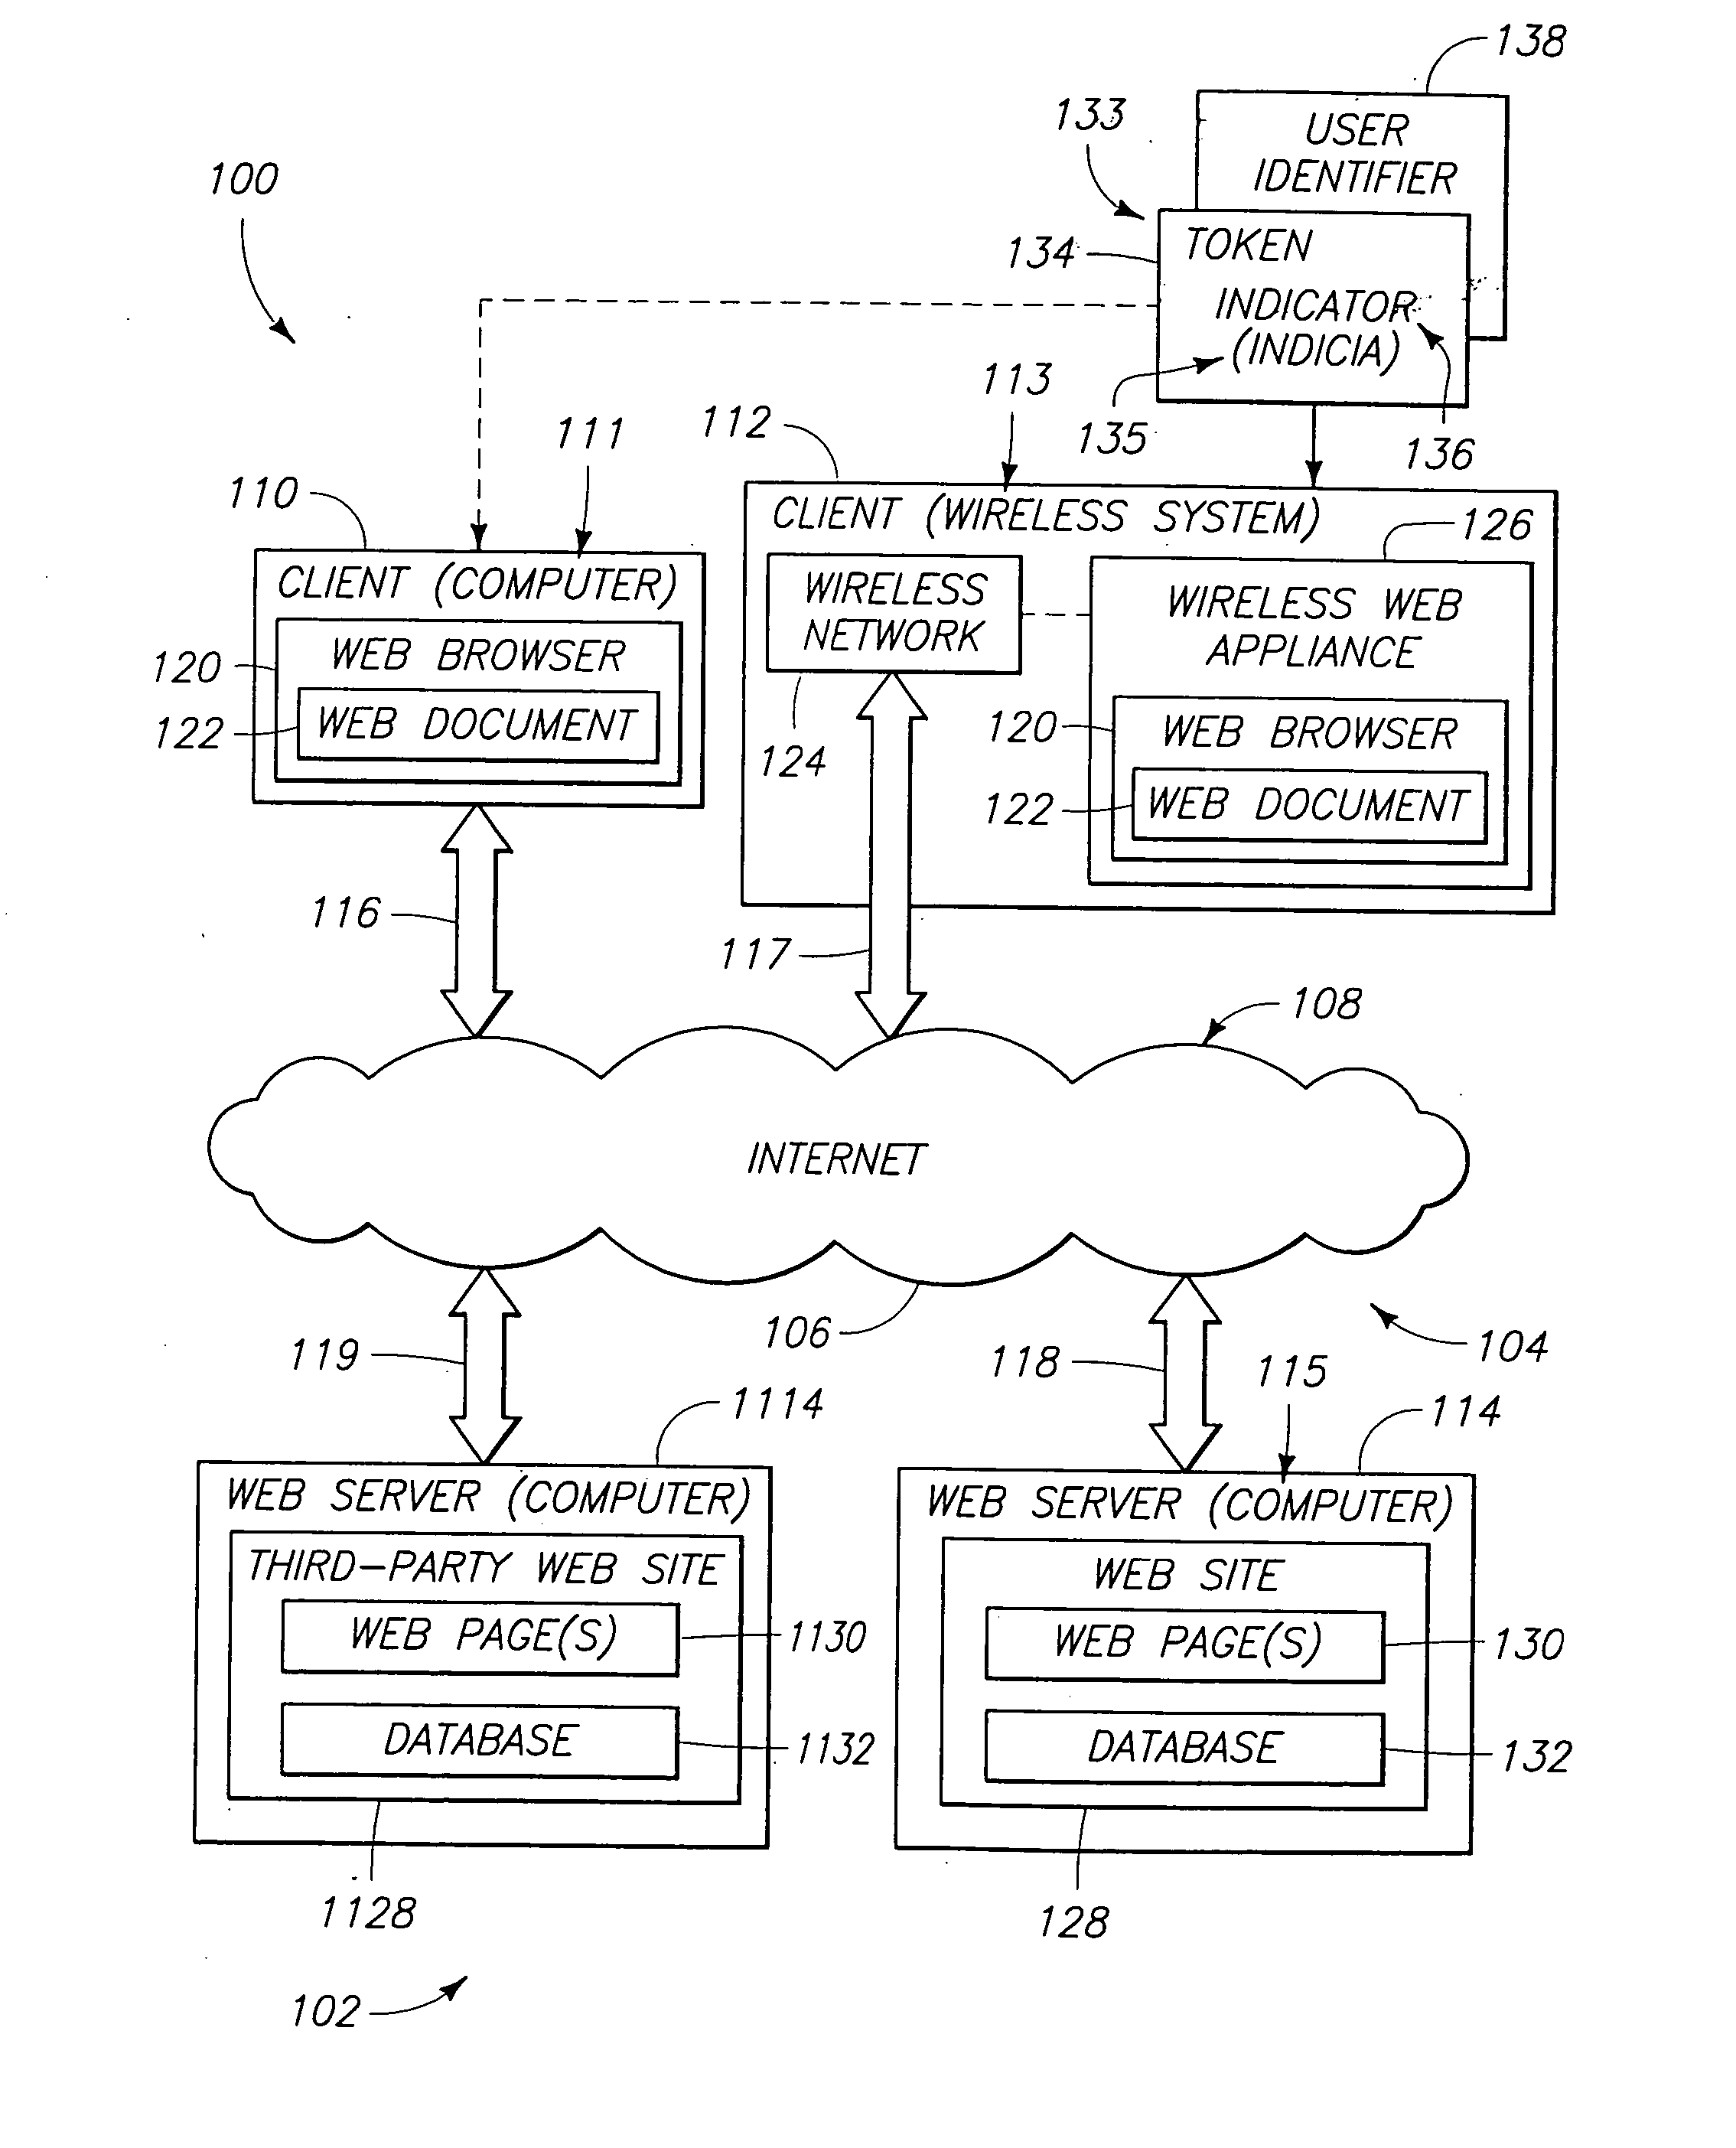 Method for associating content objects with a database